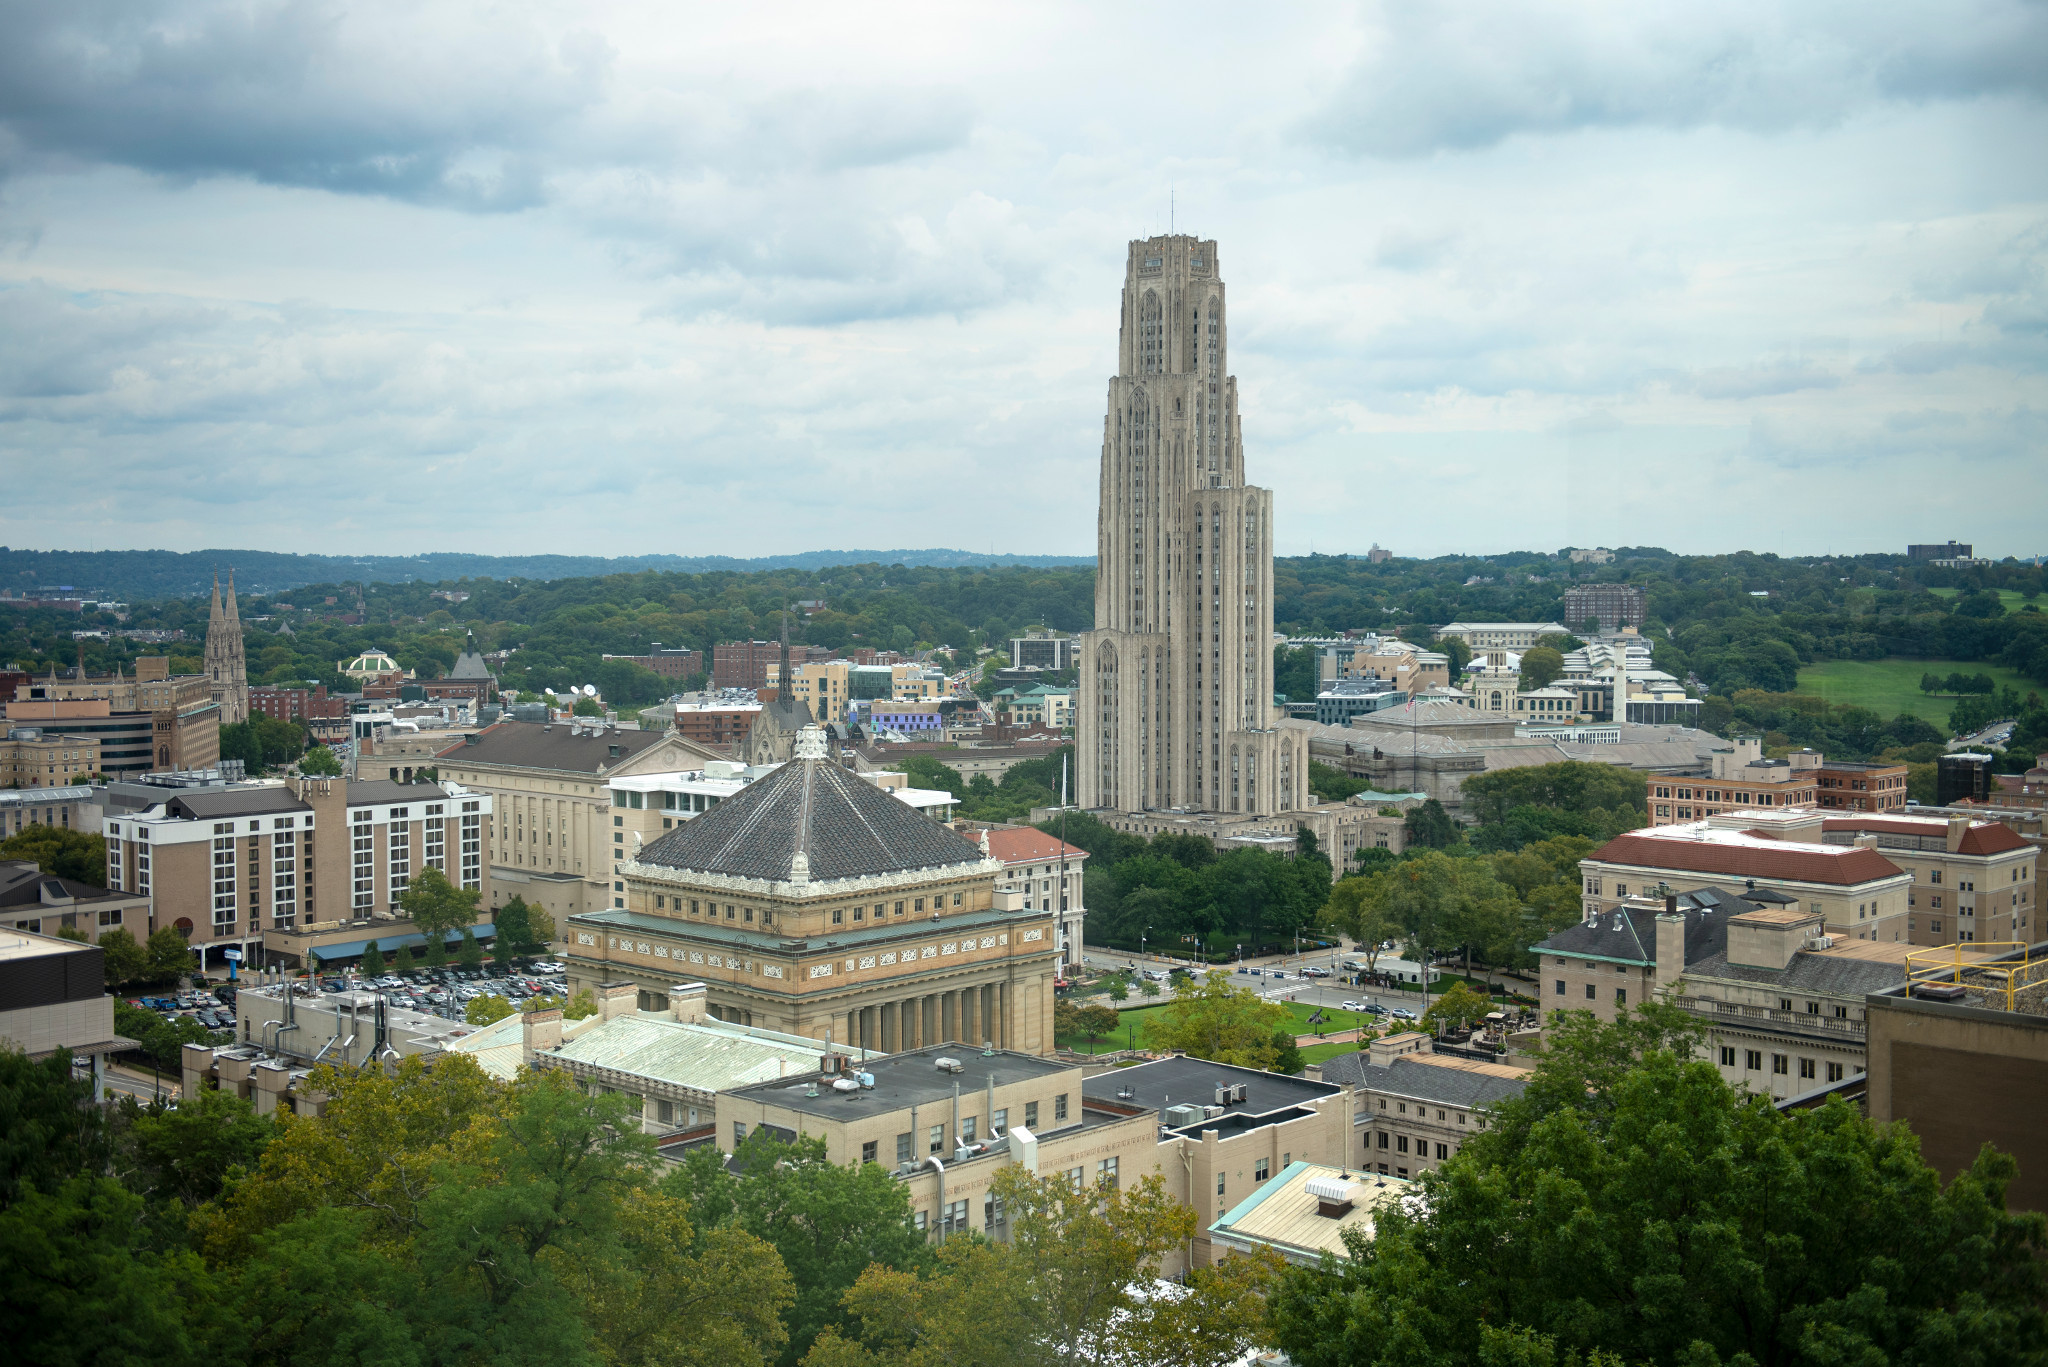 view of oakland campus, focusing on cathedral of learning and soldiers and sailors building 